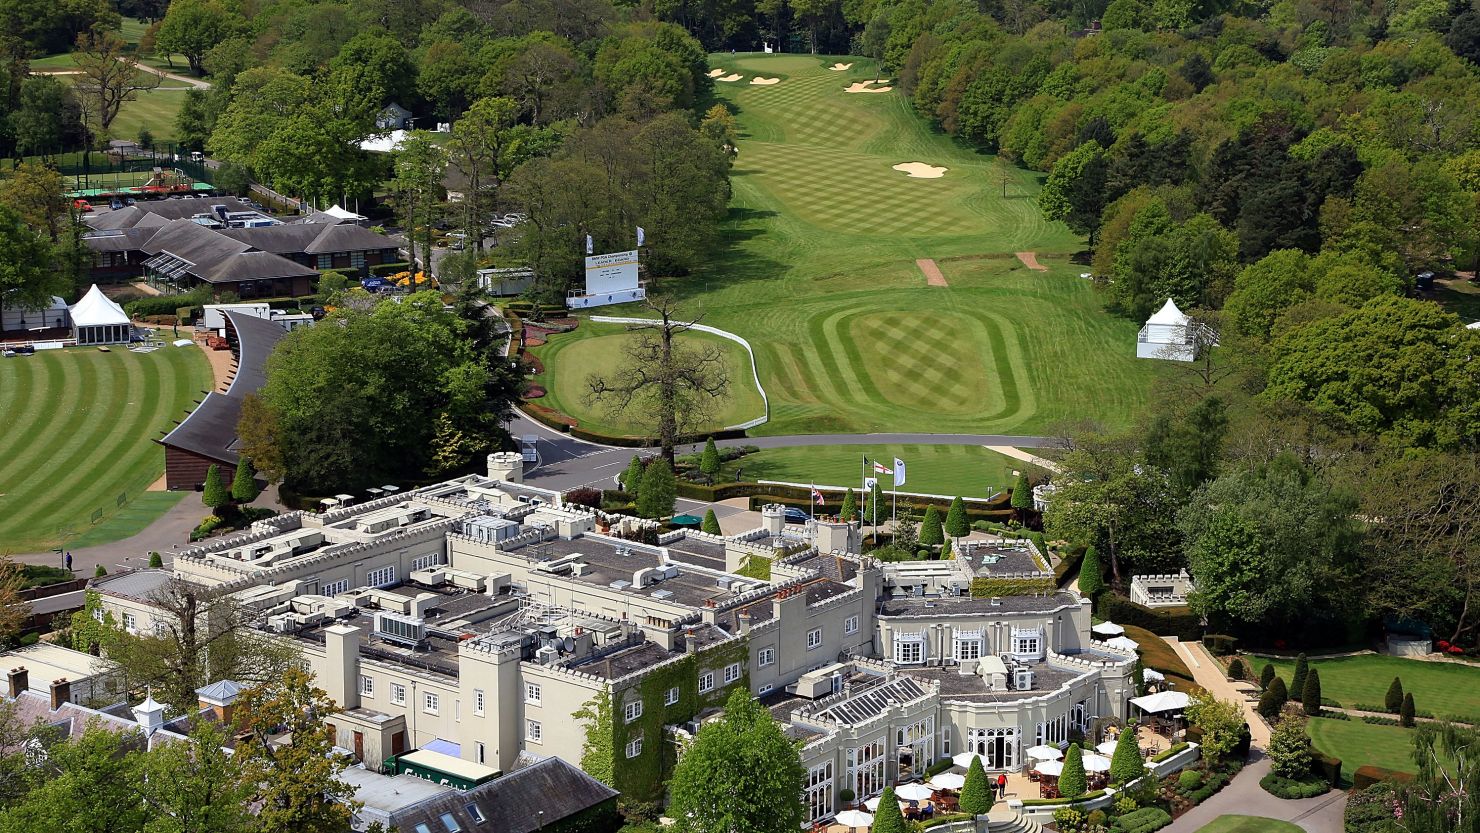 Wentworth stages the European Tour's PGA Championship each May.